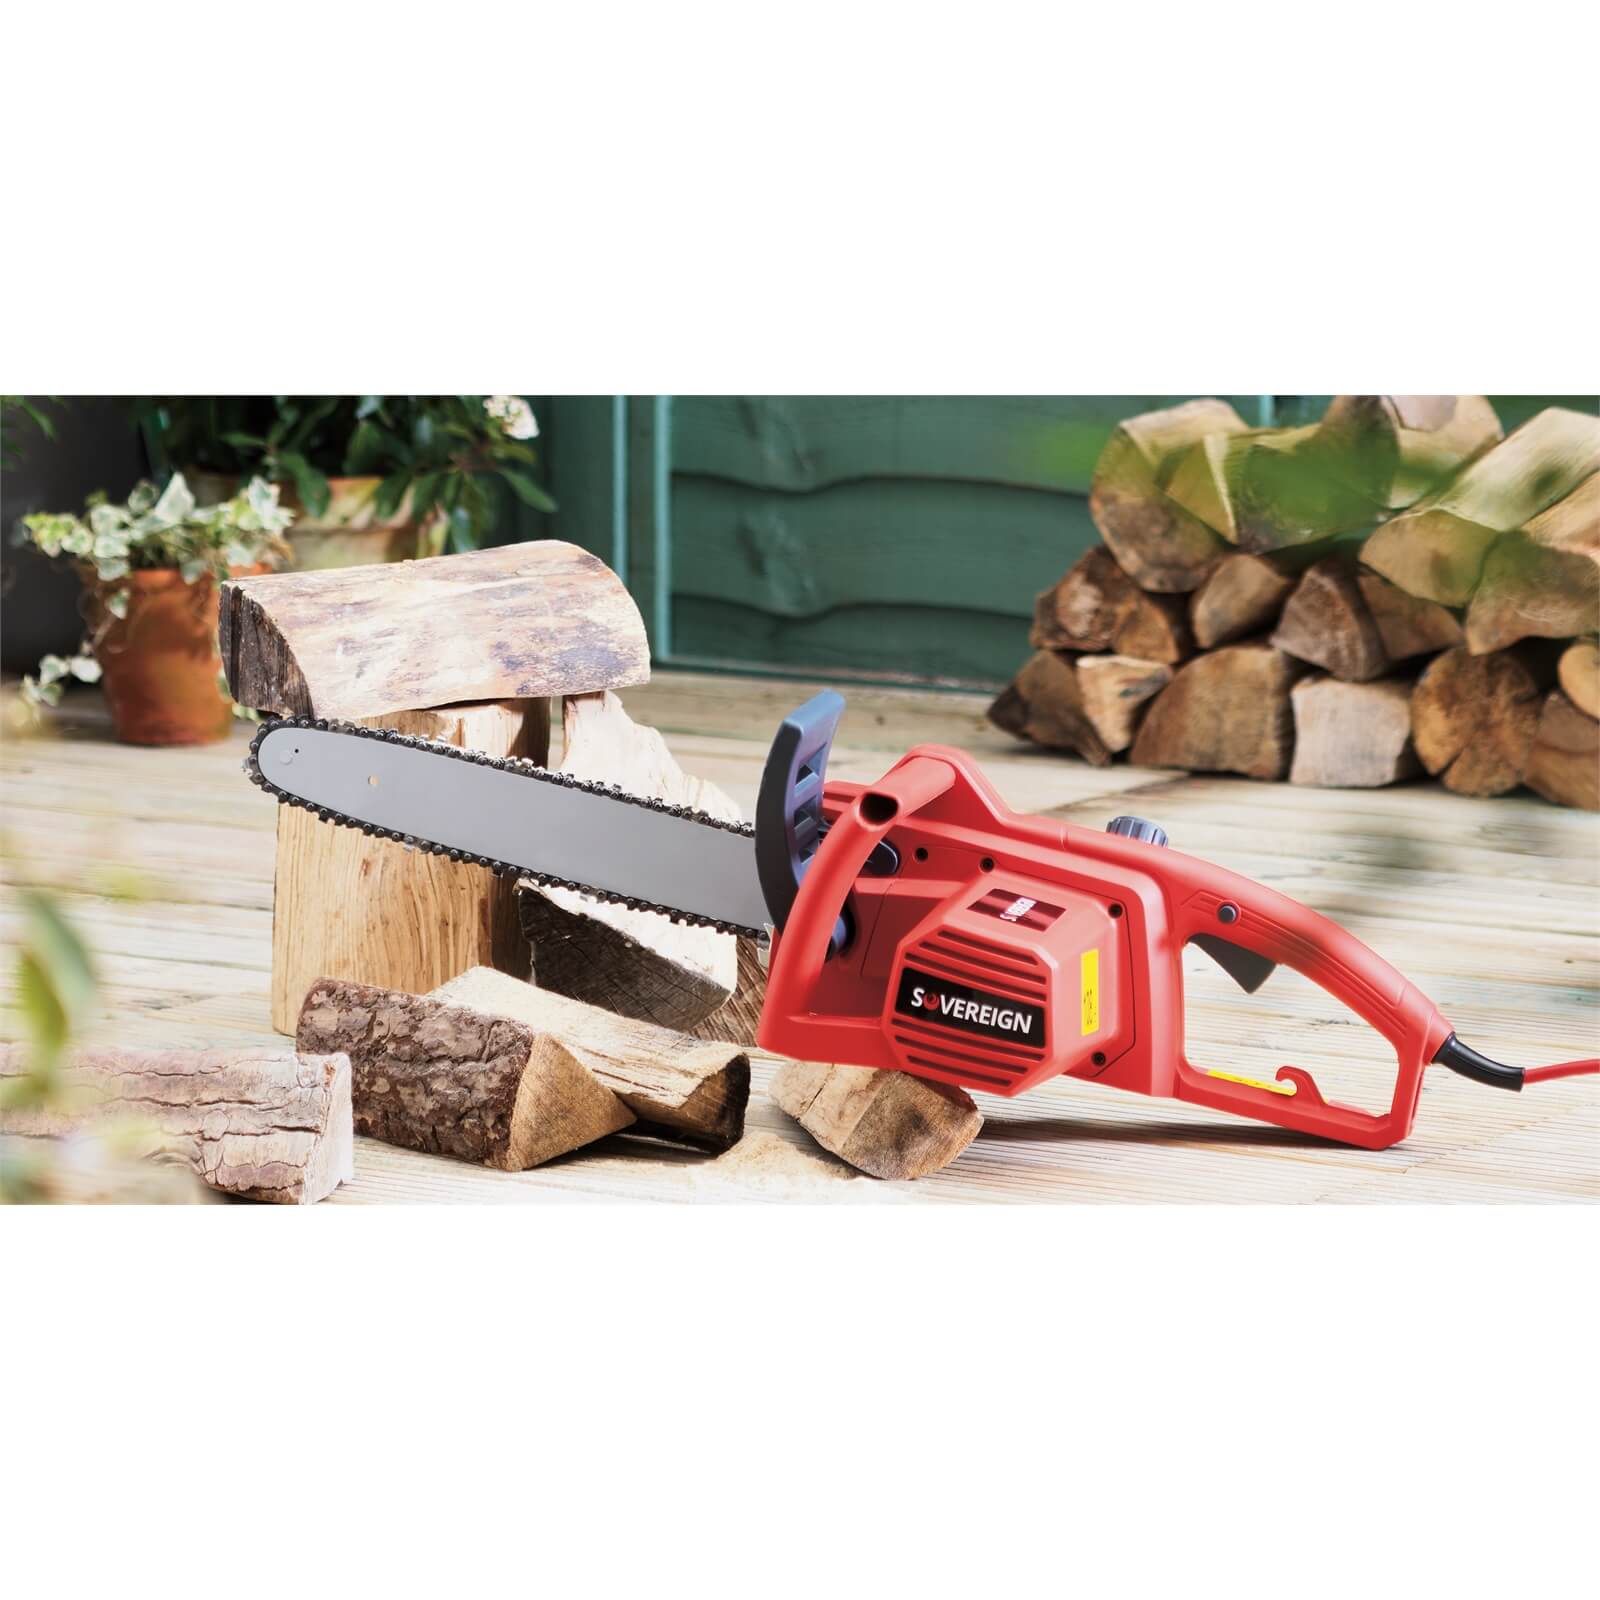 Sovereign 1800W Chainsaw